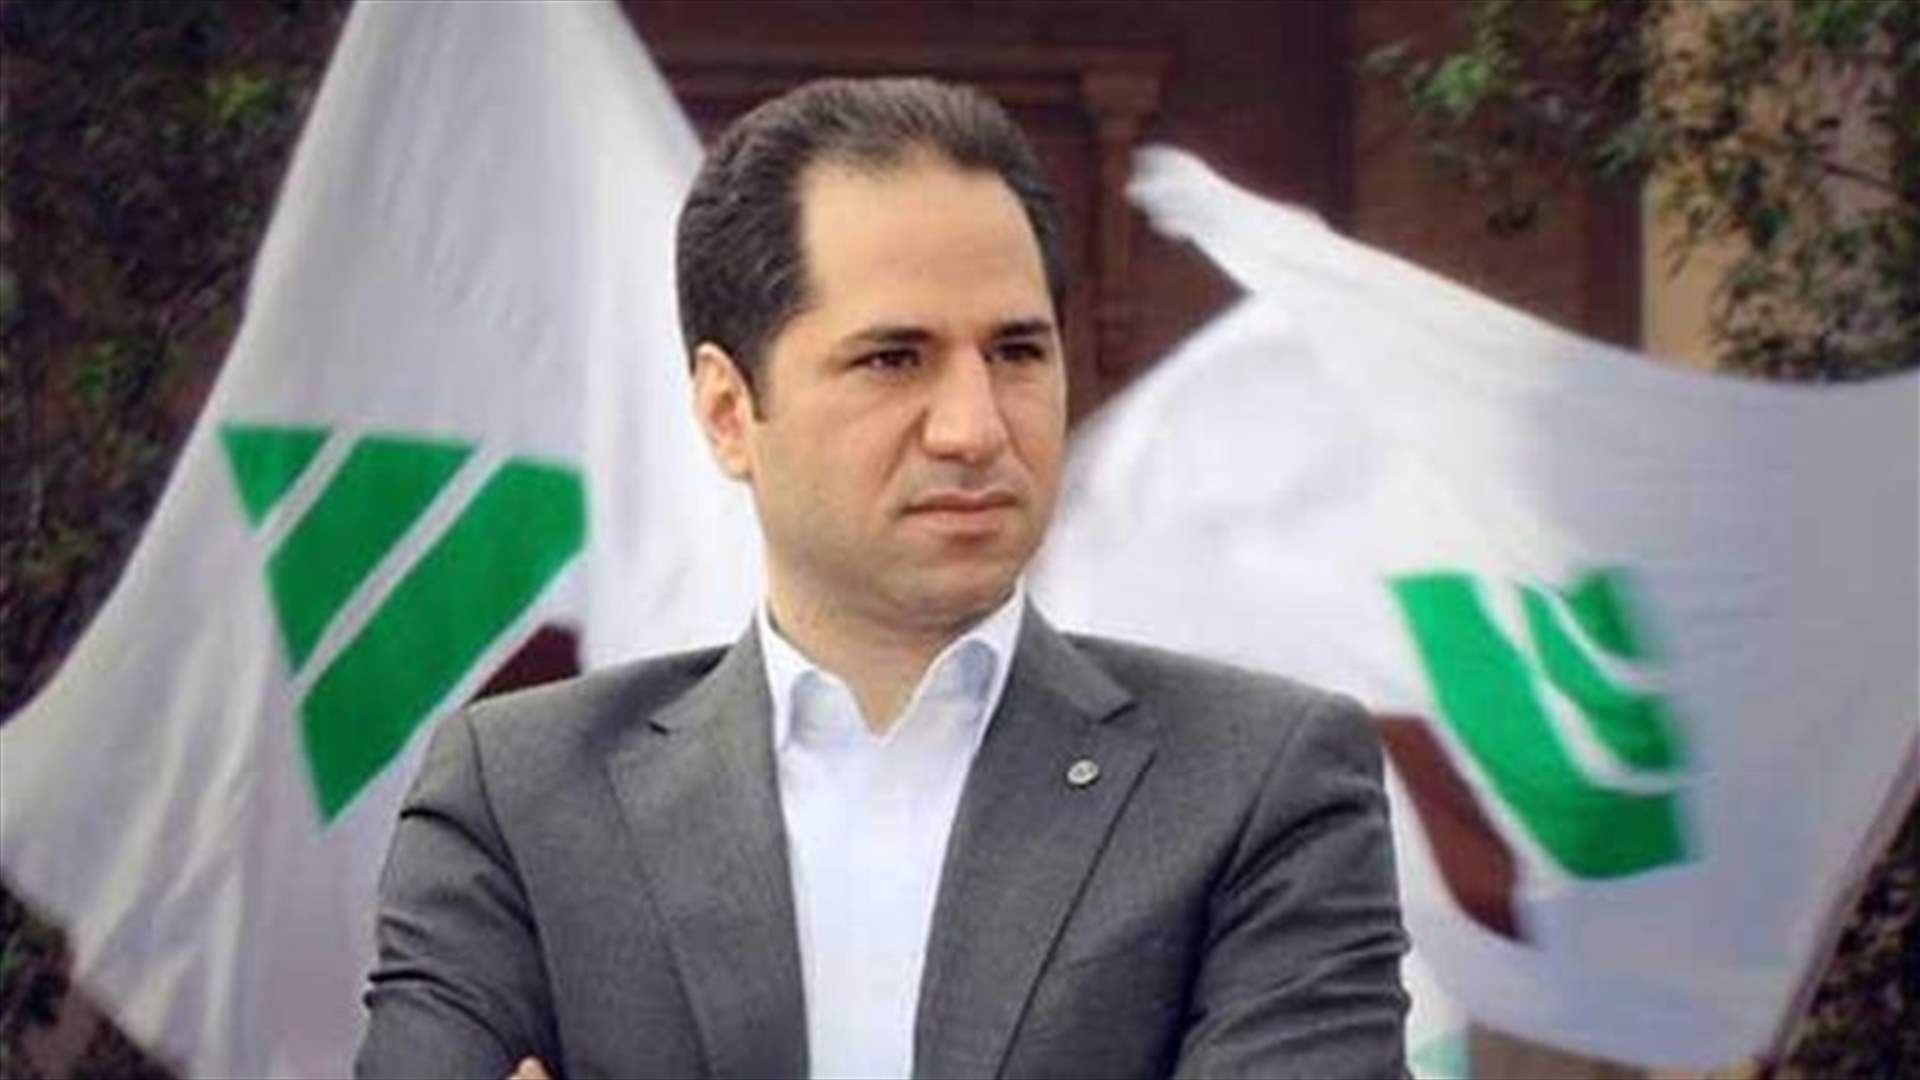 Kataeb party calls for “burying” the 1960 electoral law